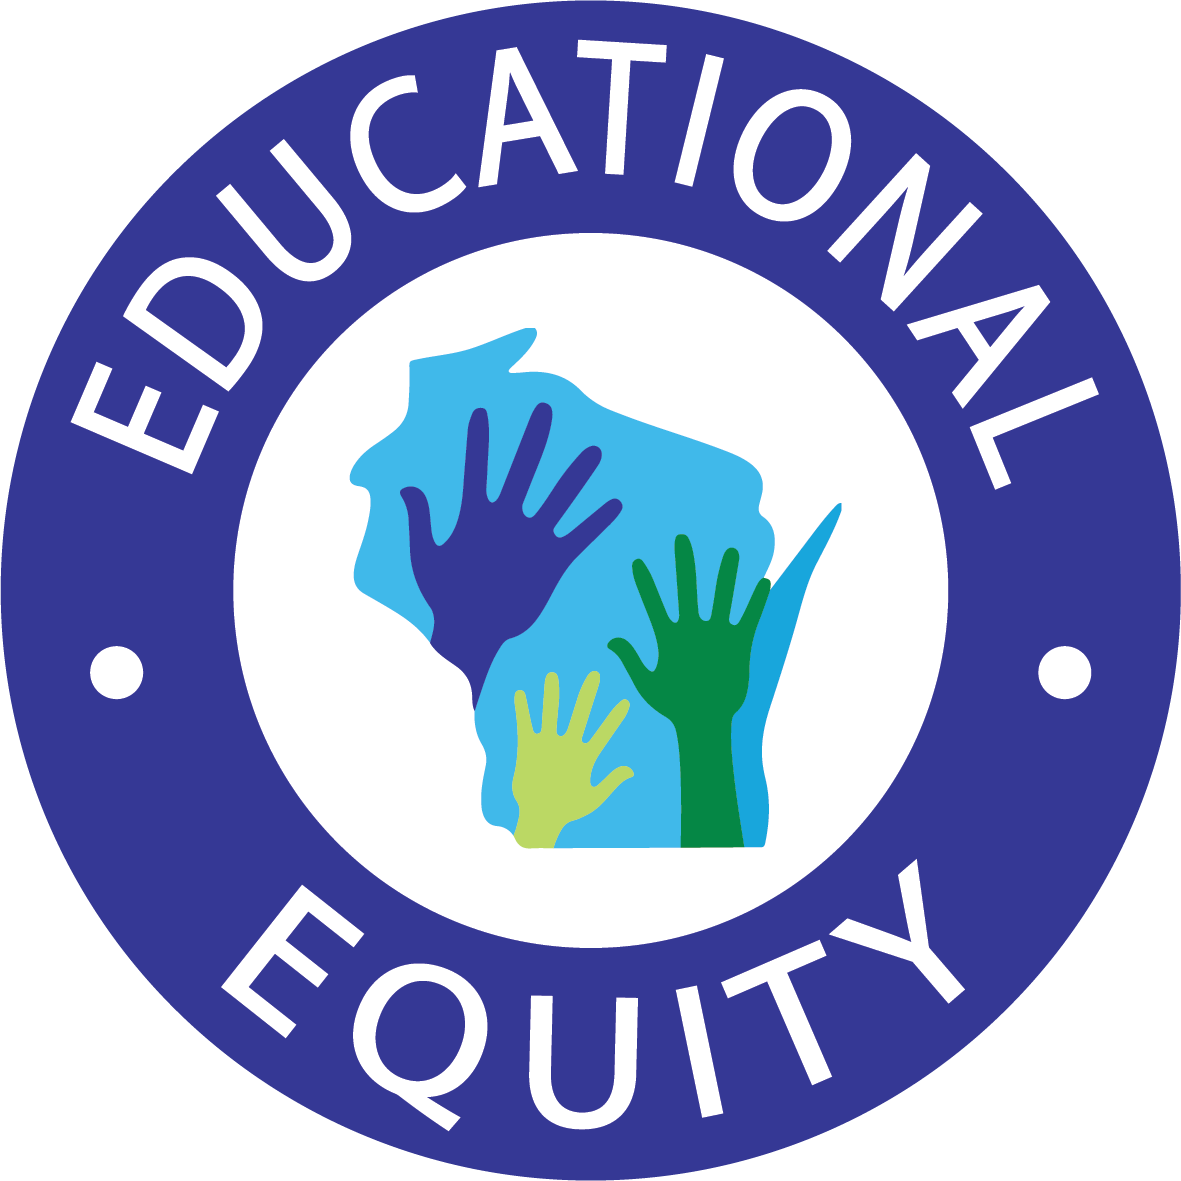 logo with the shape of wisconsin in blue in the center and a dark blue circle around, on which is written "educational equity"